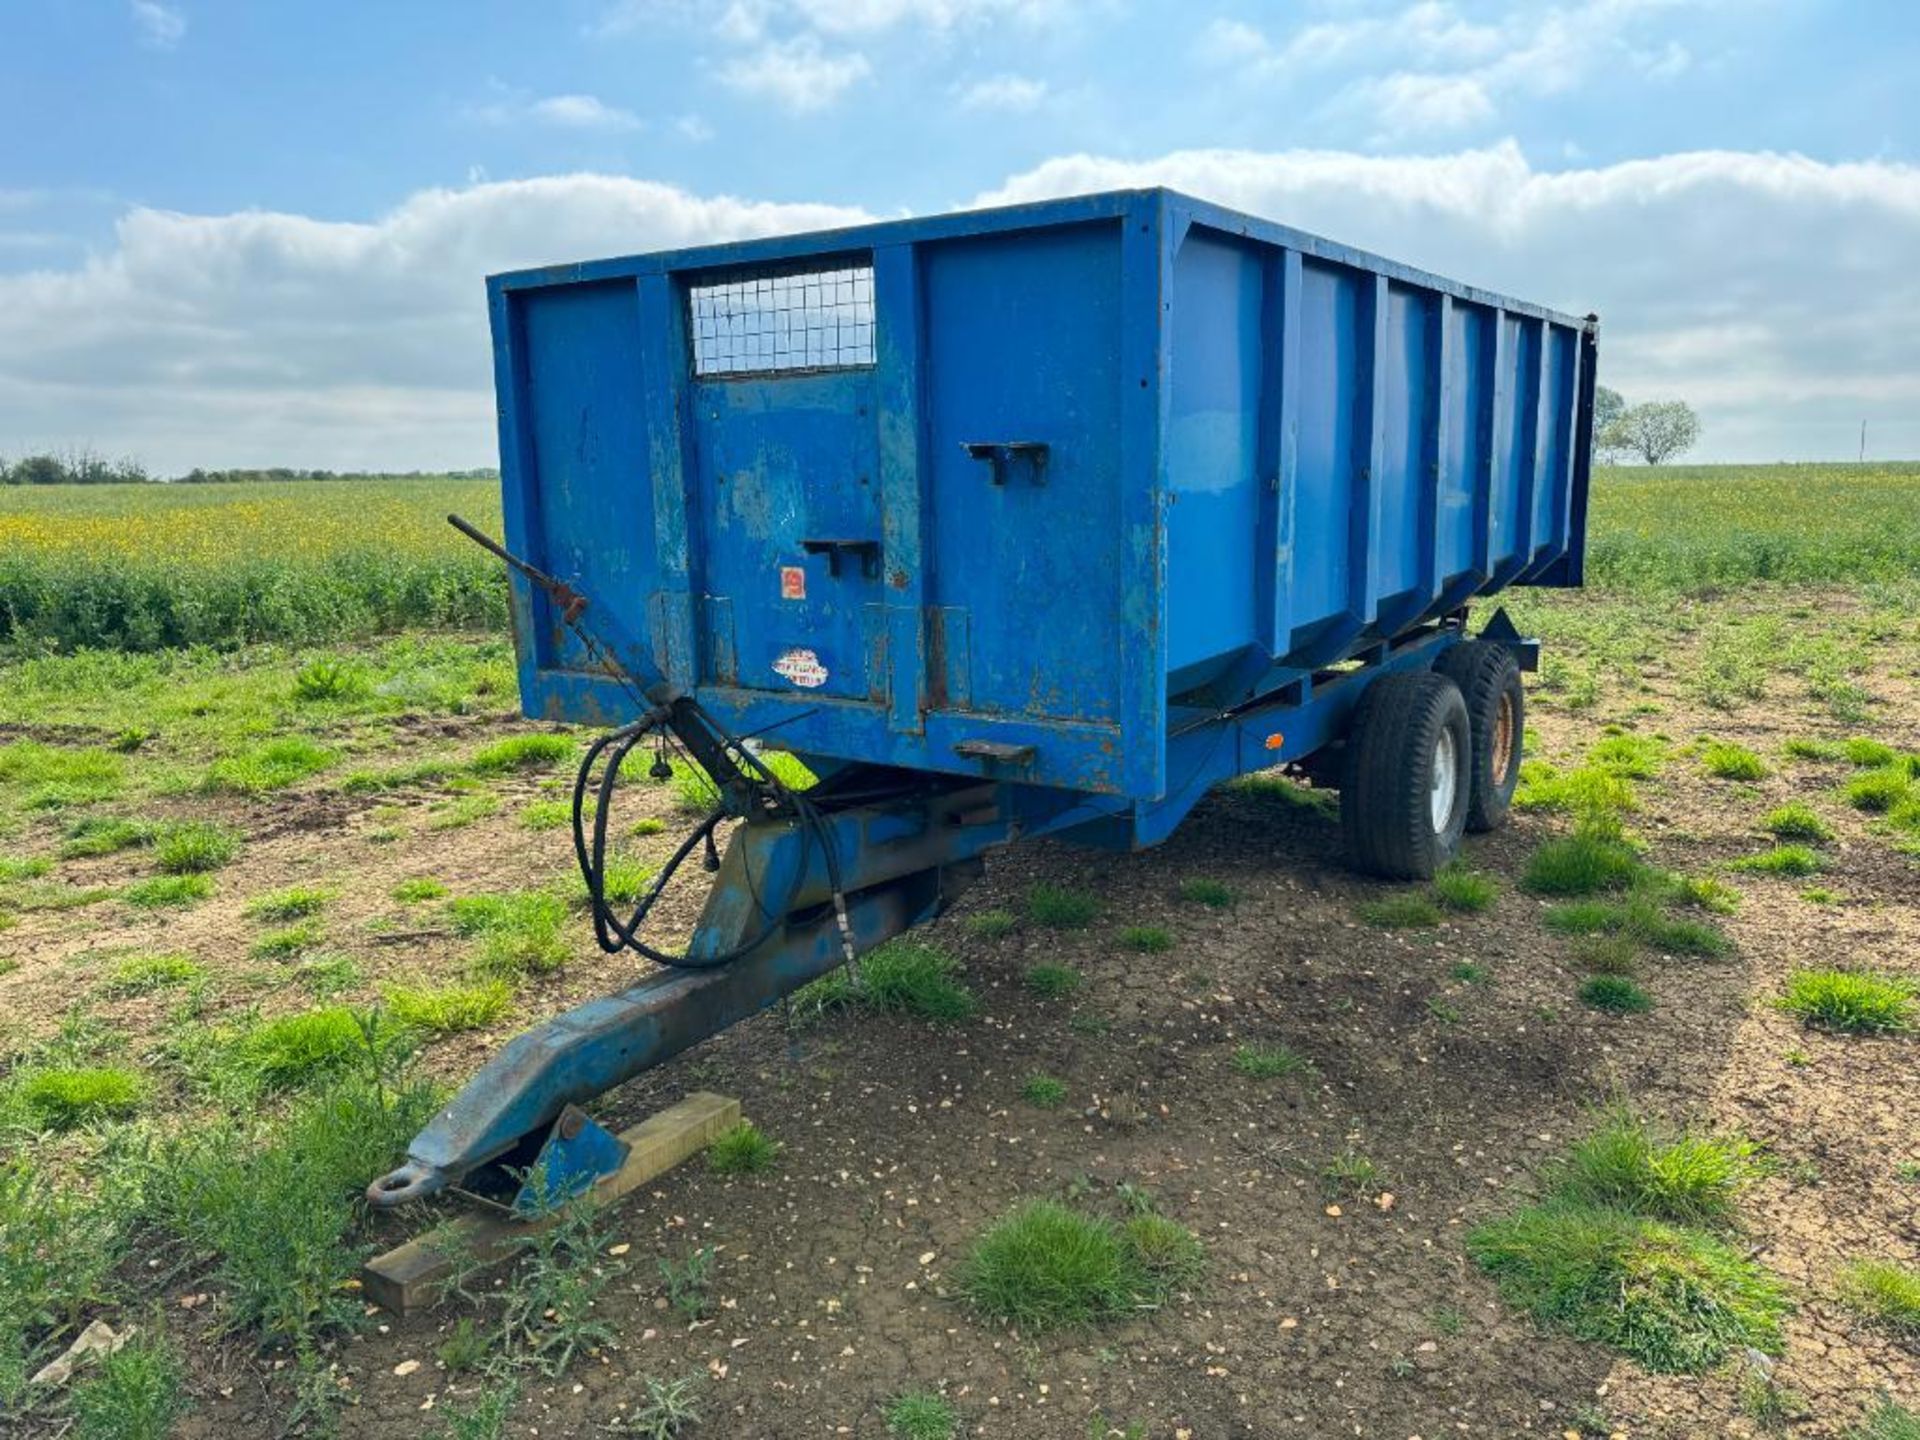 1978 AS Marston F10 10t twin axle grain trailer with manual tailgate and grain chute. Serial No: 418